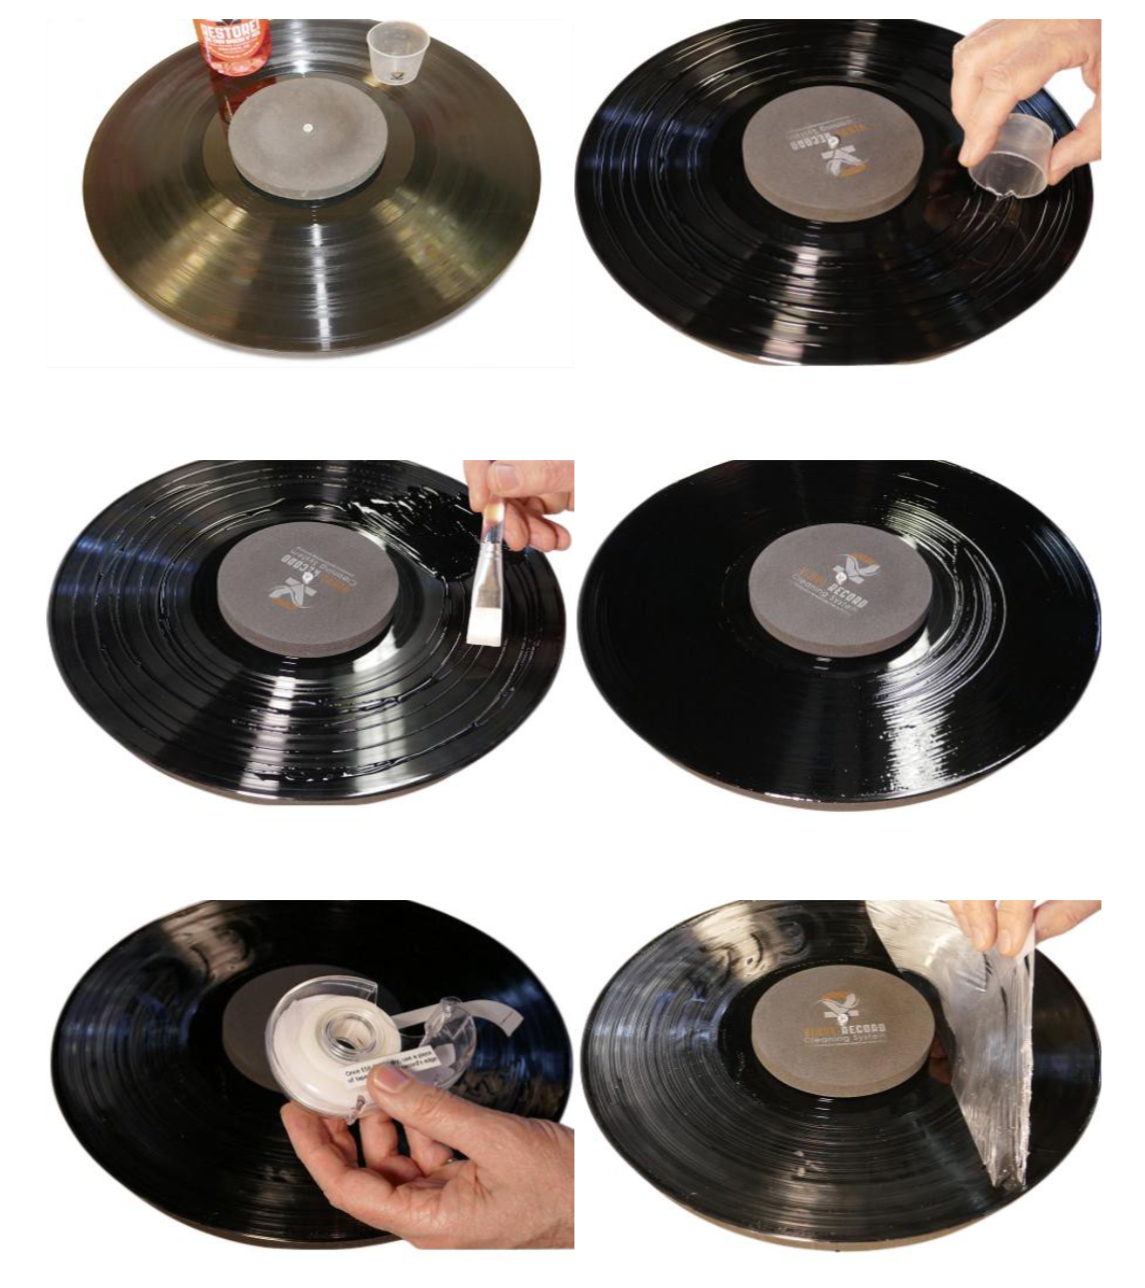 informal Frugal brake Review – The Vinyl Record Cleaning System from The Vinyl Record Cleaning  Company - Part 1 of 2 | Mac Edition Radio